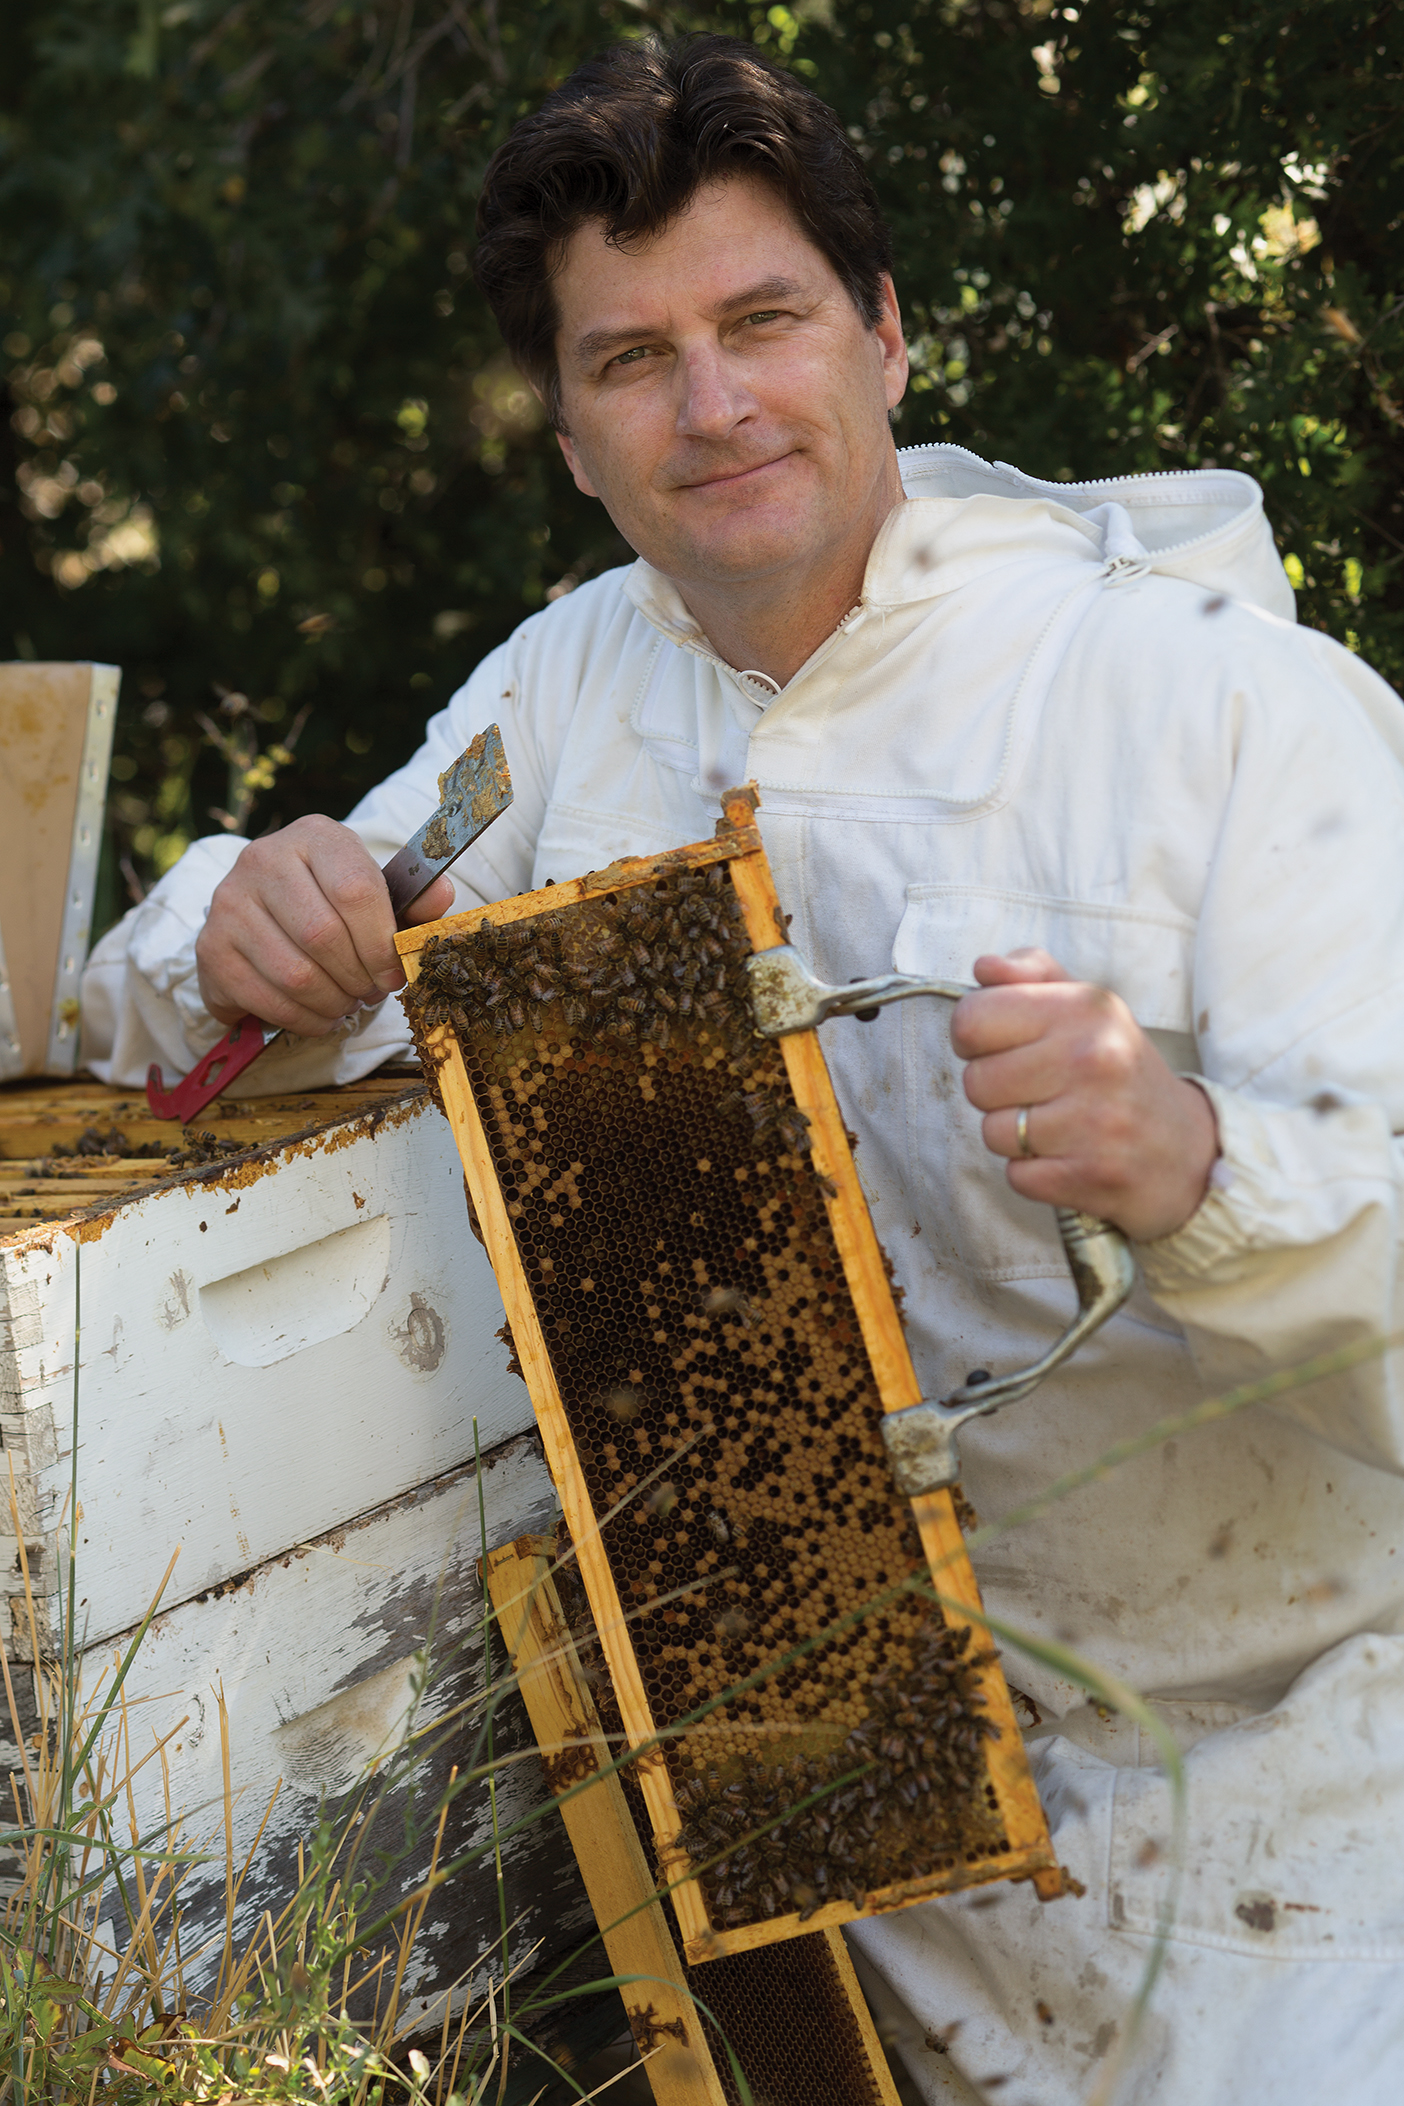 Quint Randle wearing a beekeeper outfit and holding a honeycomb tray